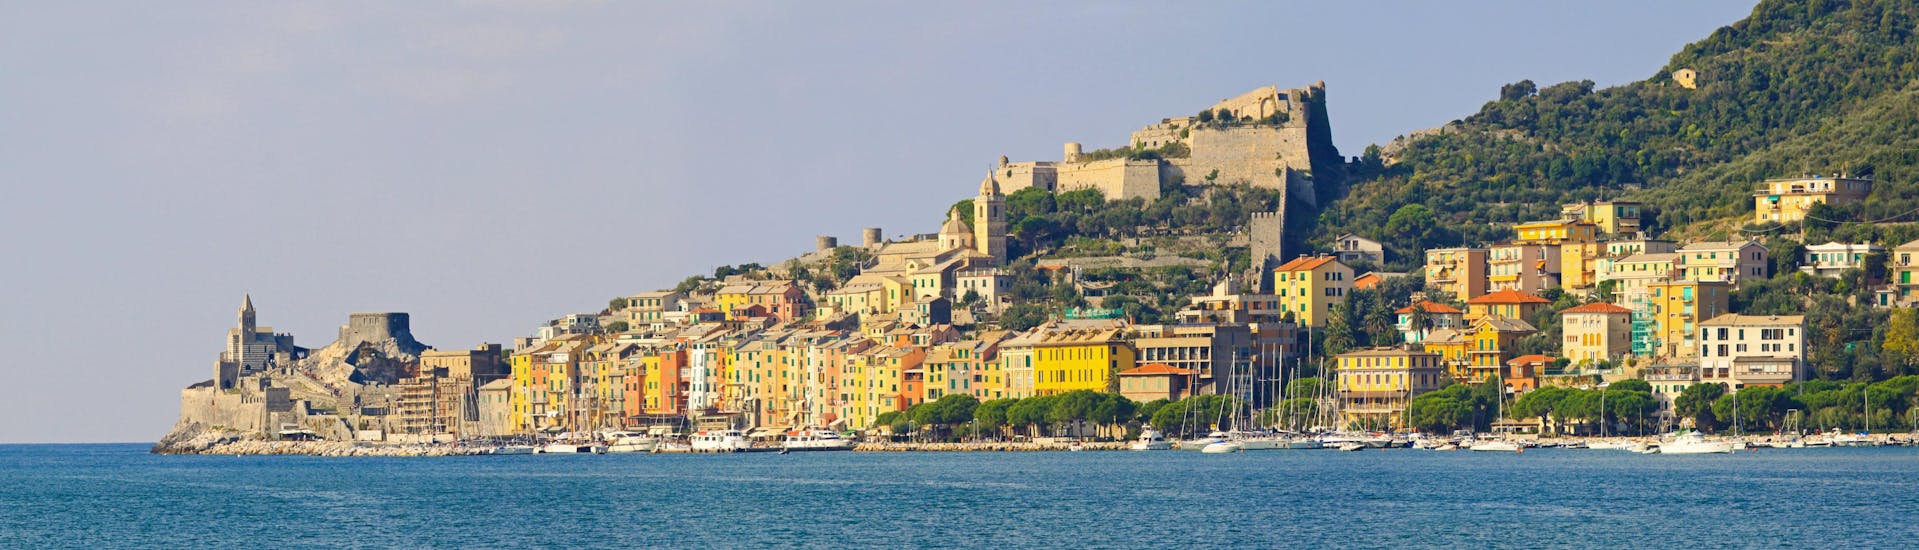 View of the colourful houses of Porto Venere, which you can see doing a boat trip to Palmaria Island.